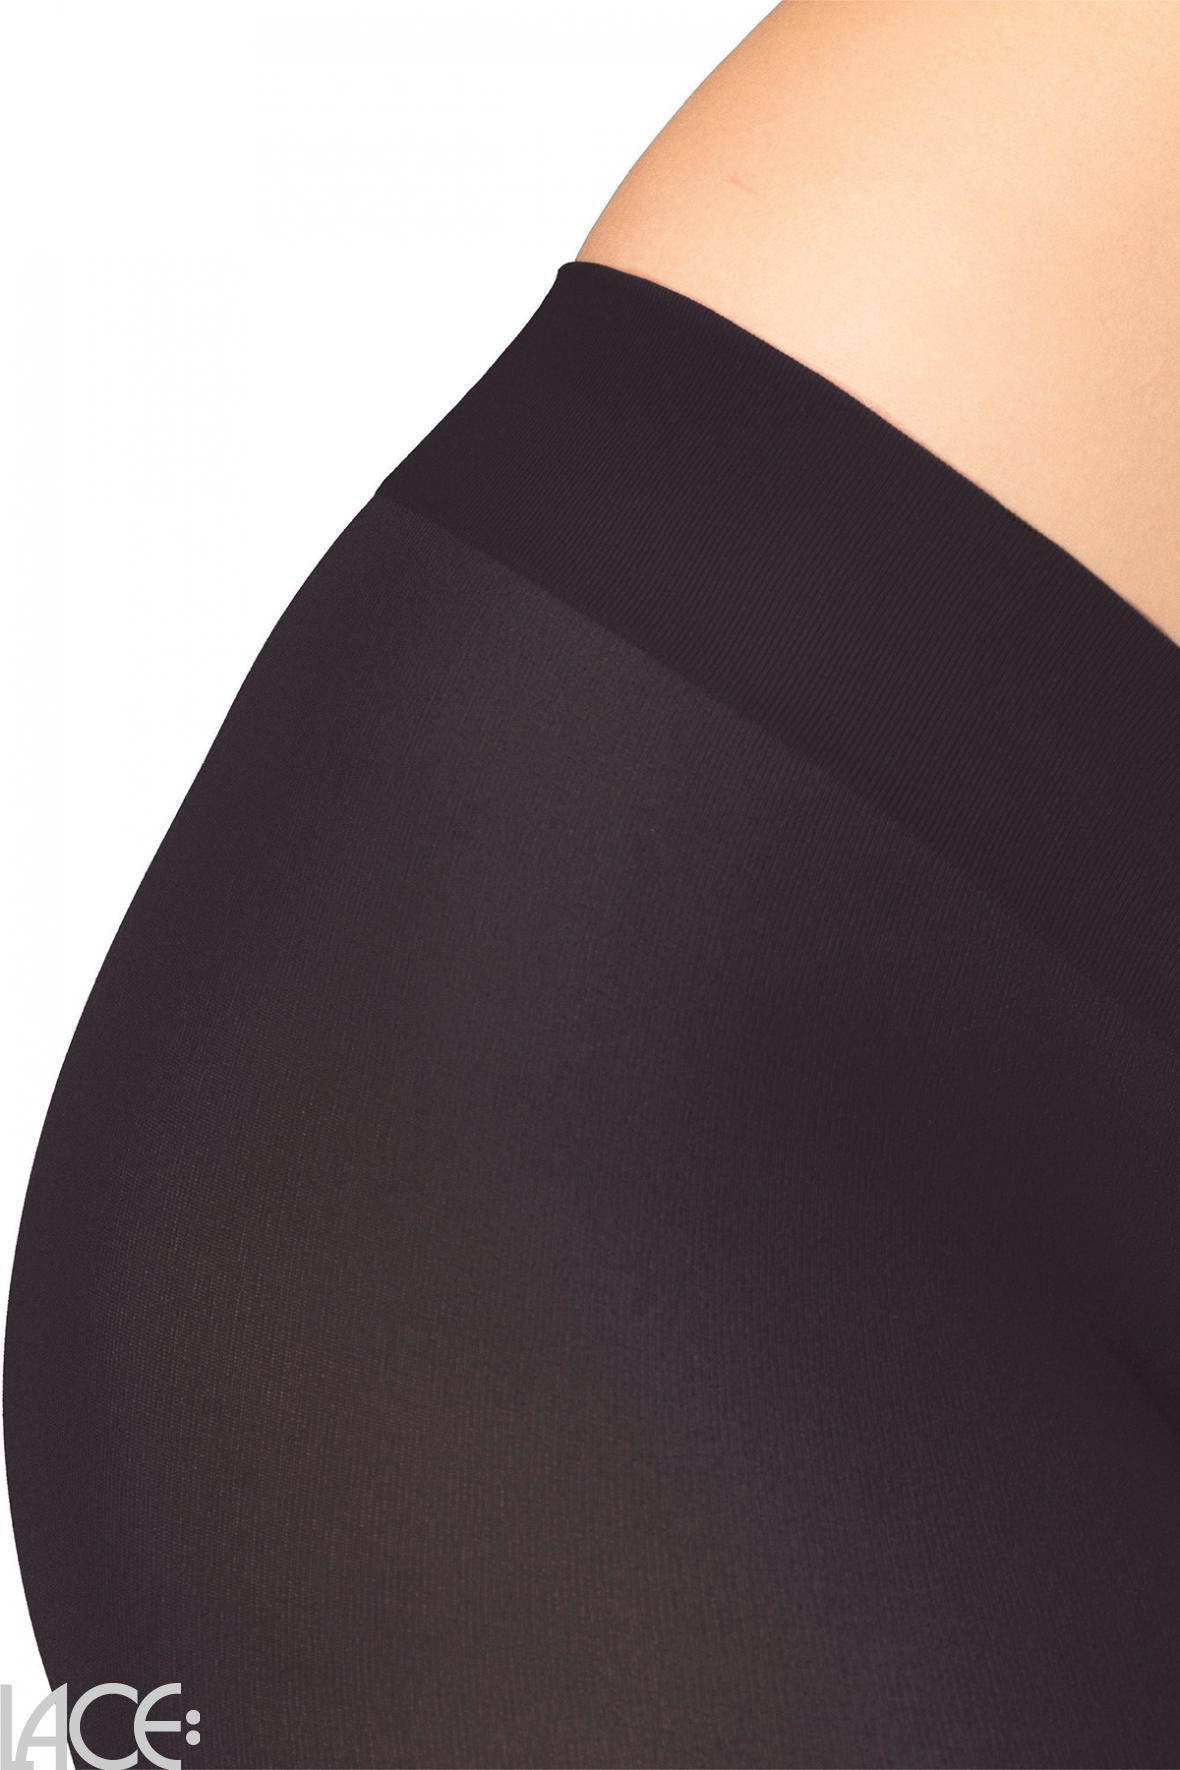  Tights - Falke - Beauty Plus 50 Tights - for short legs